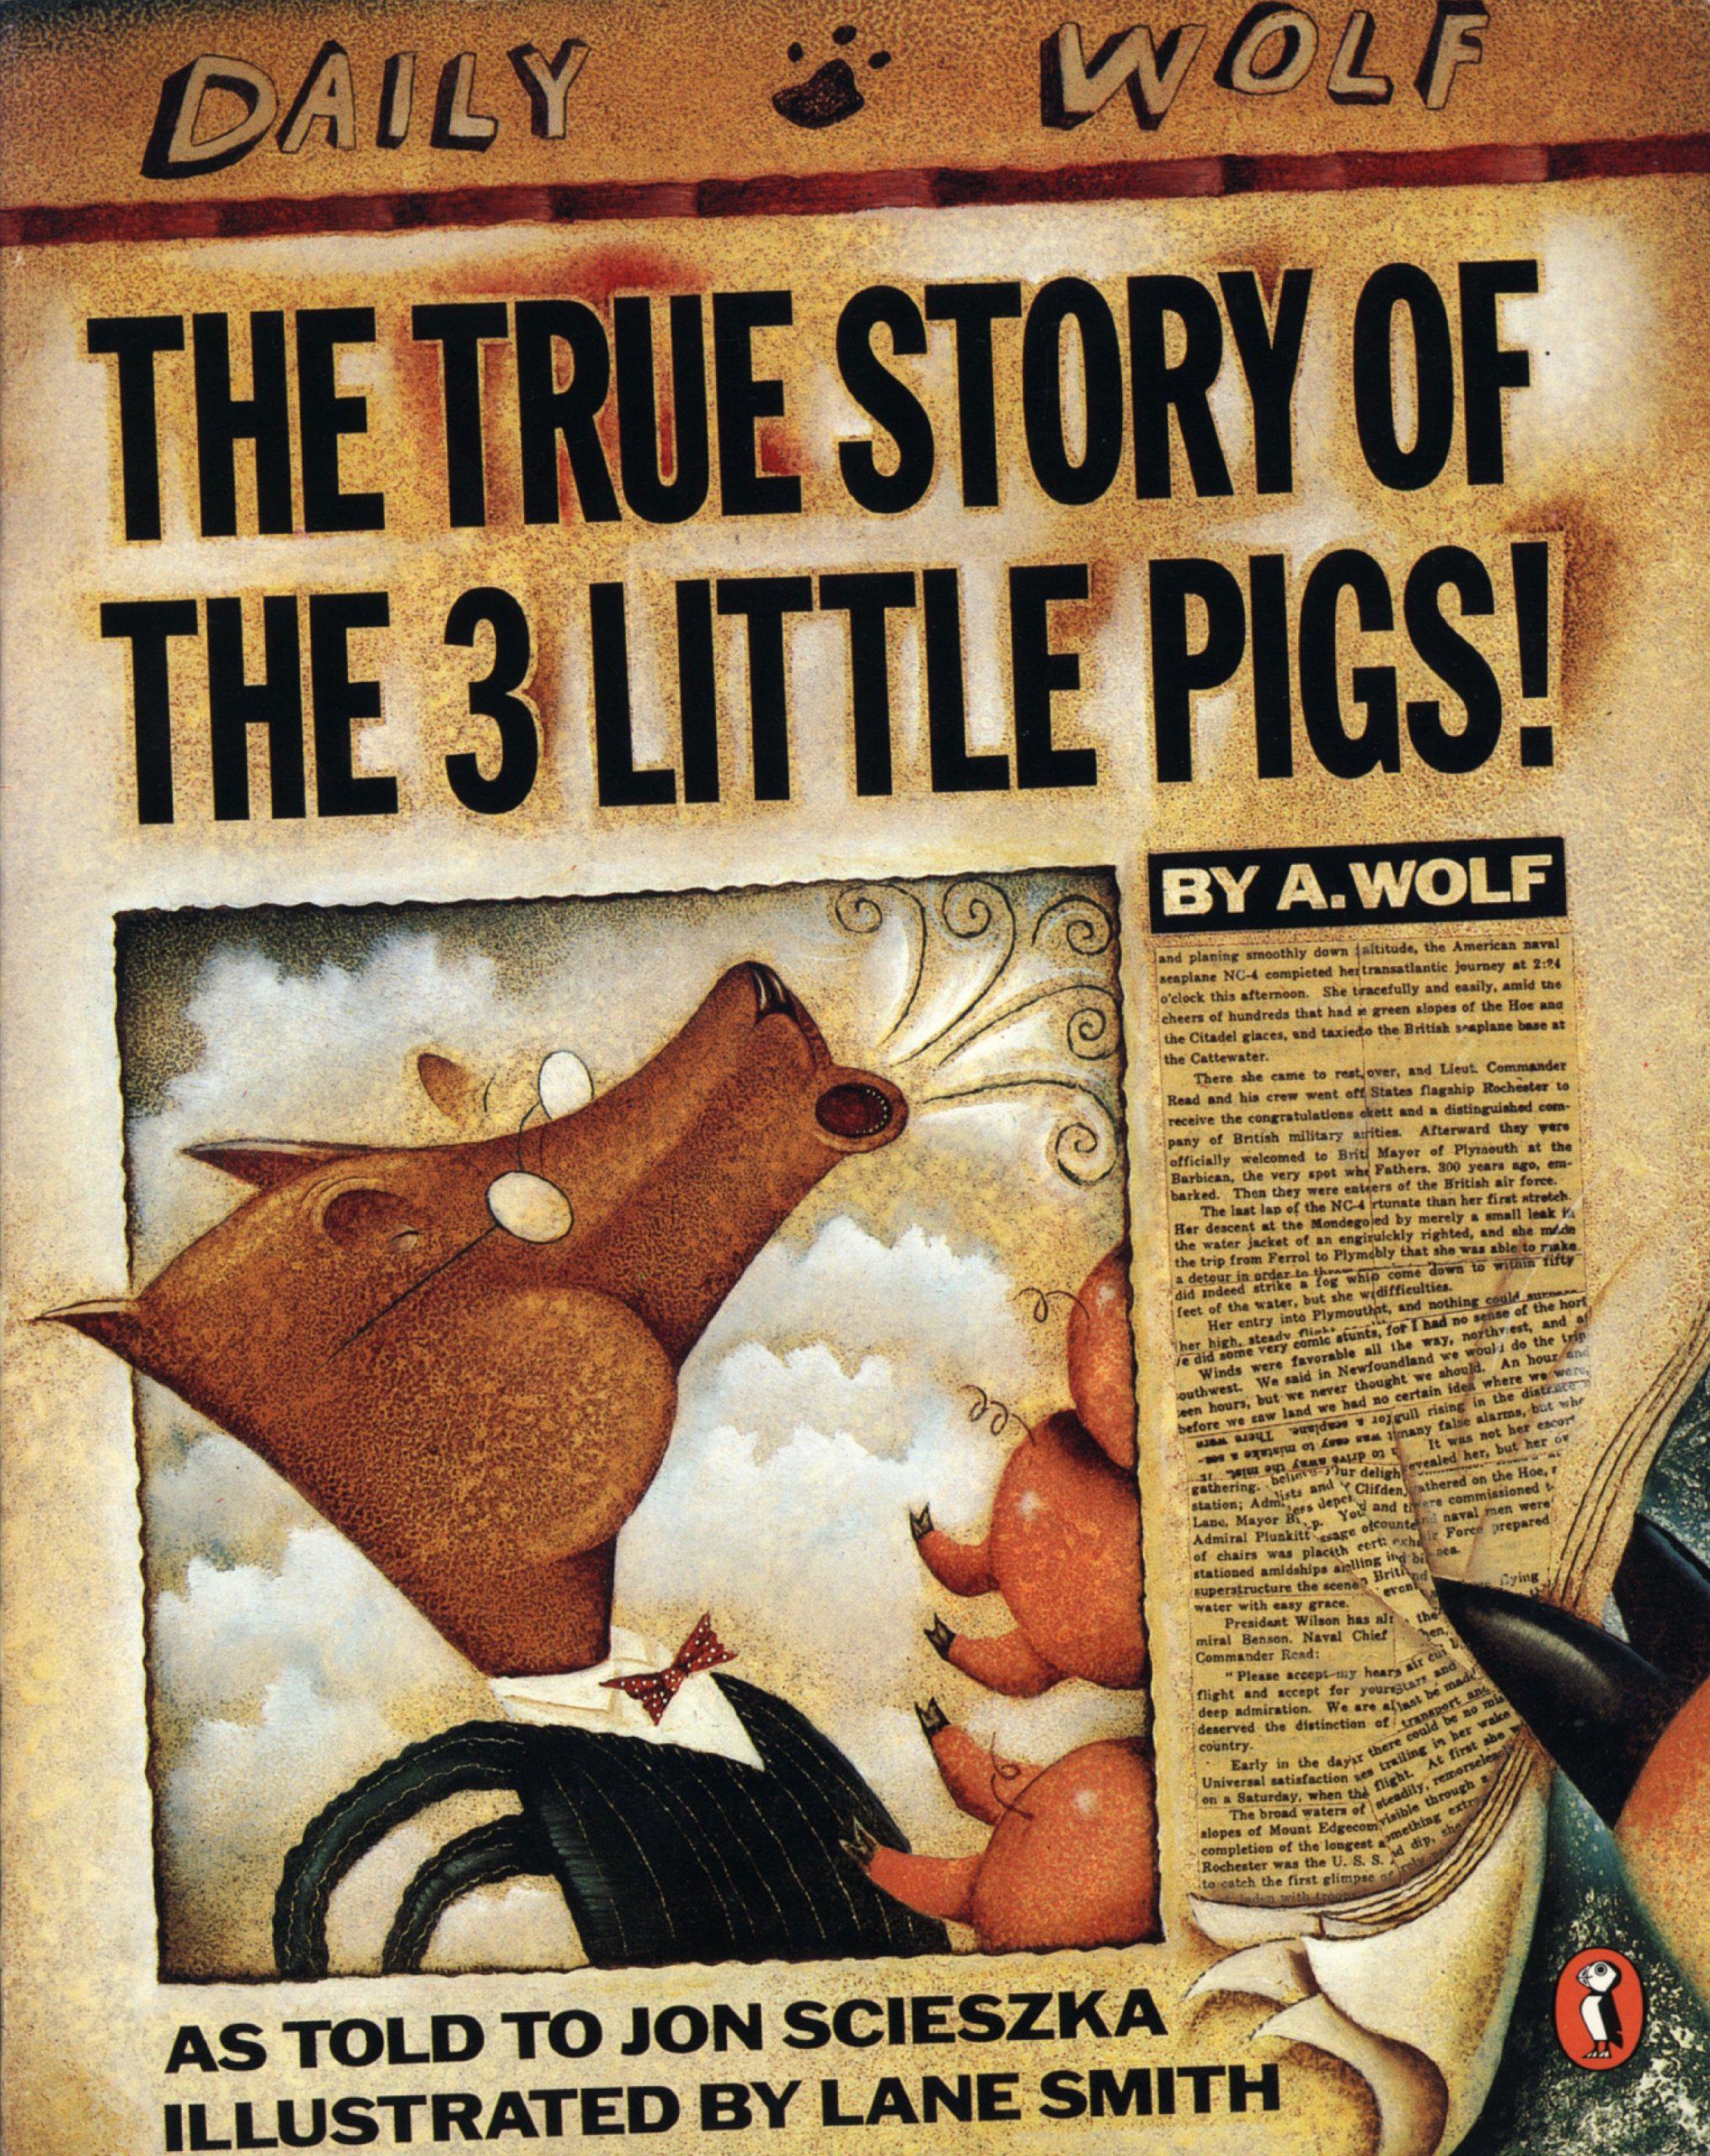 the true story of 3 little pigs